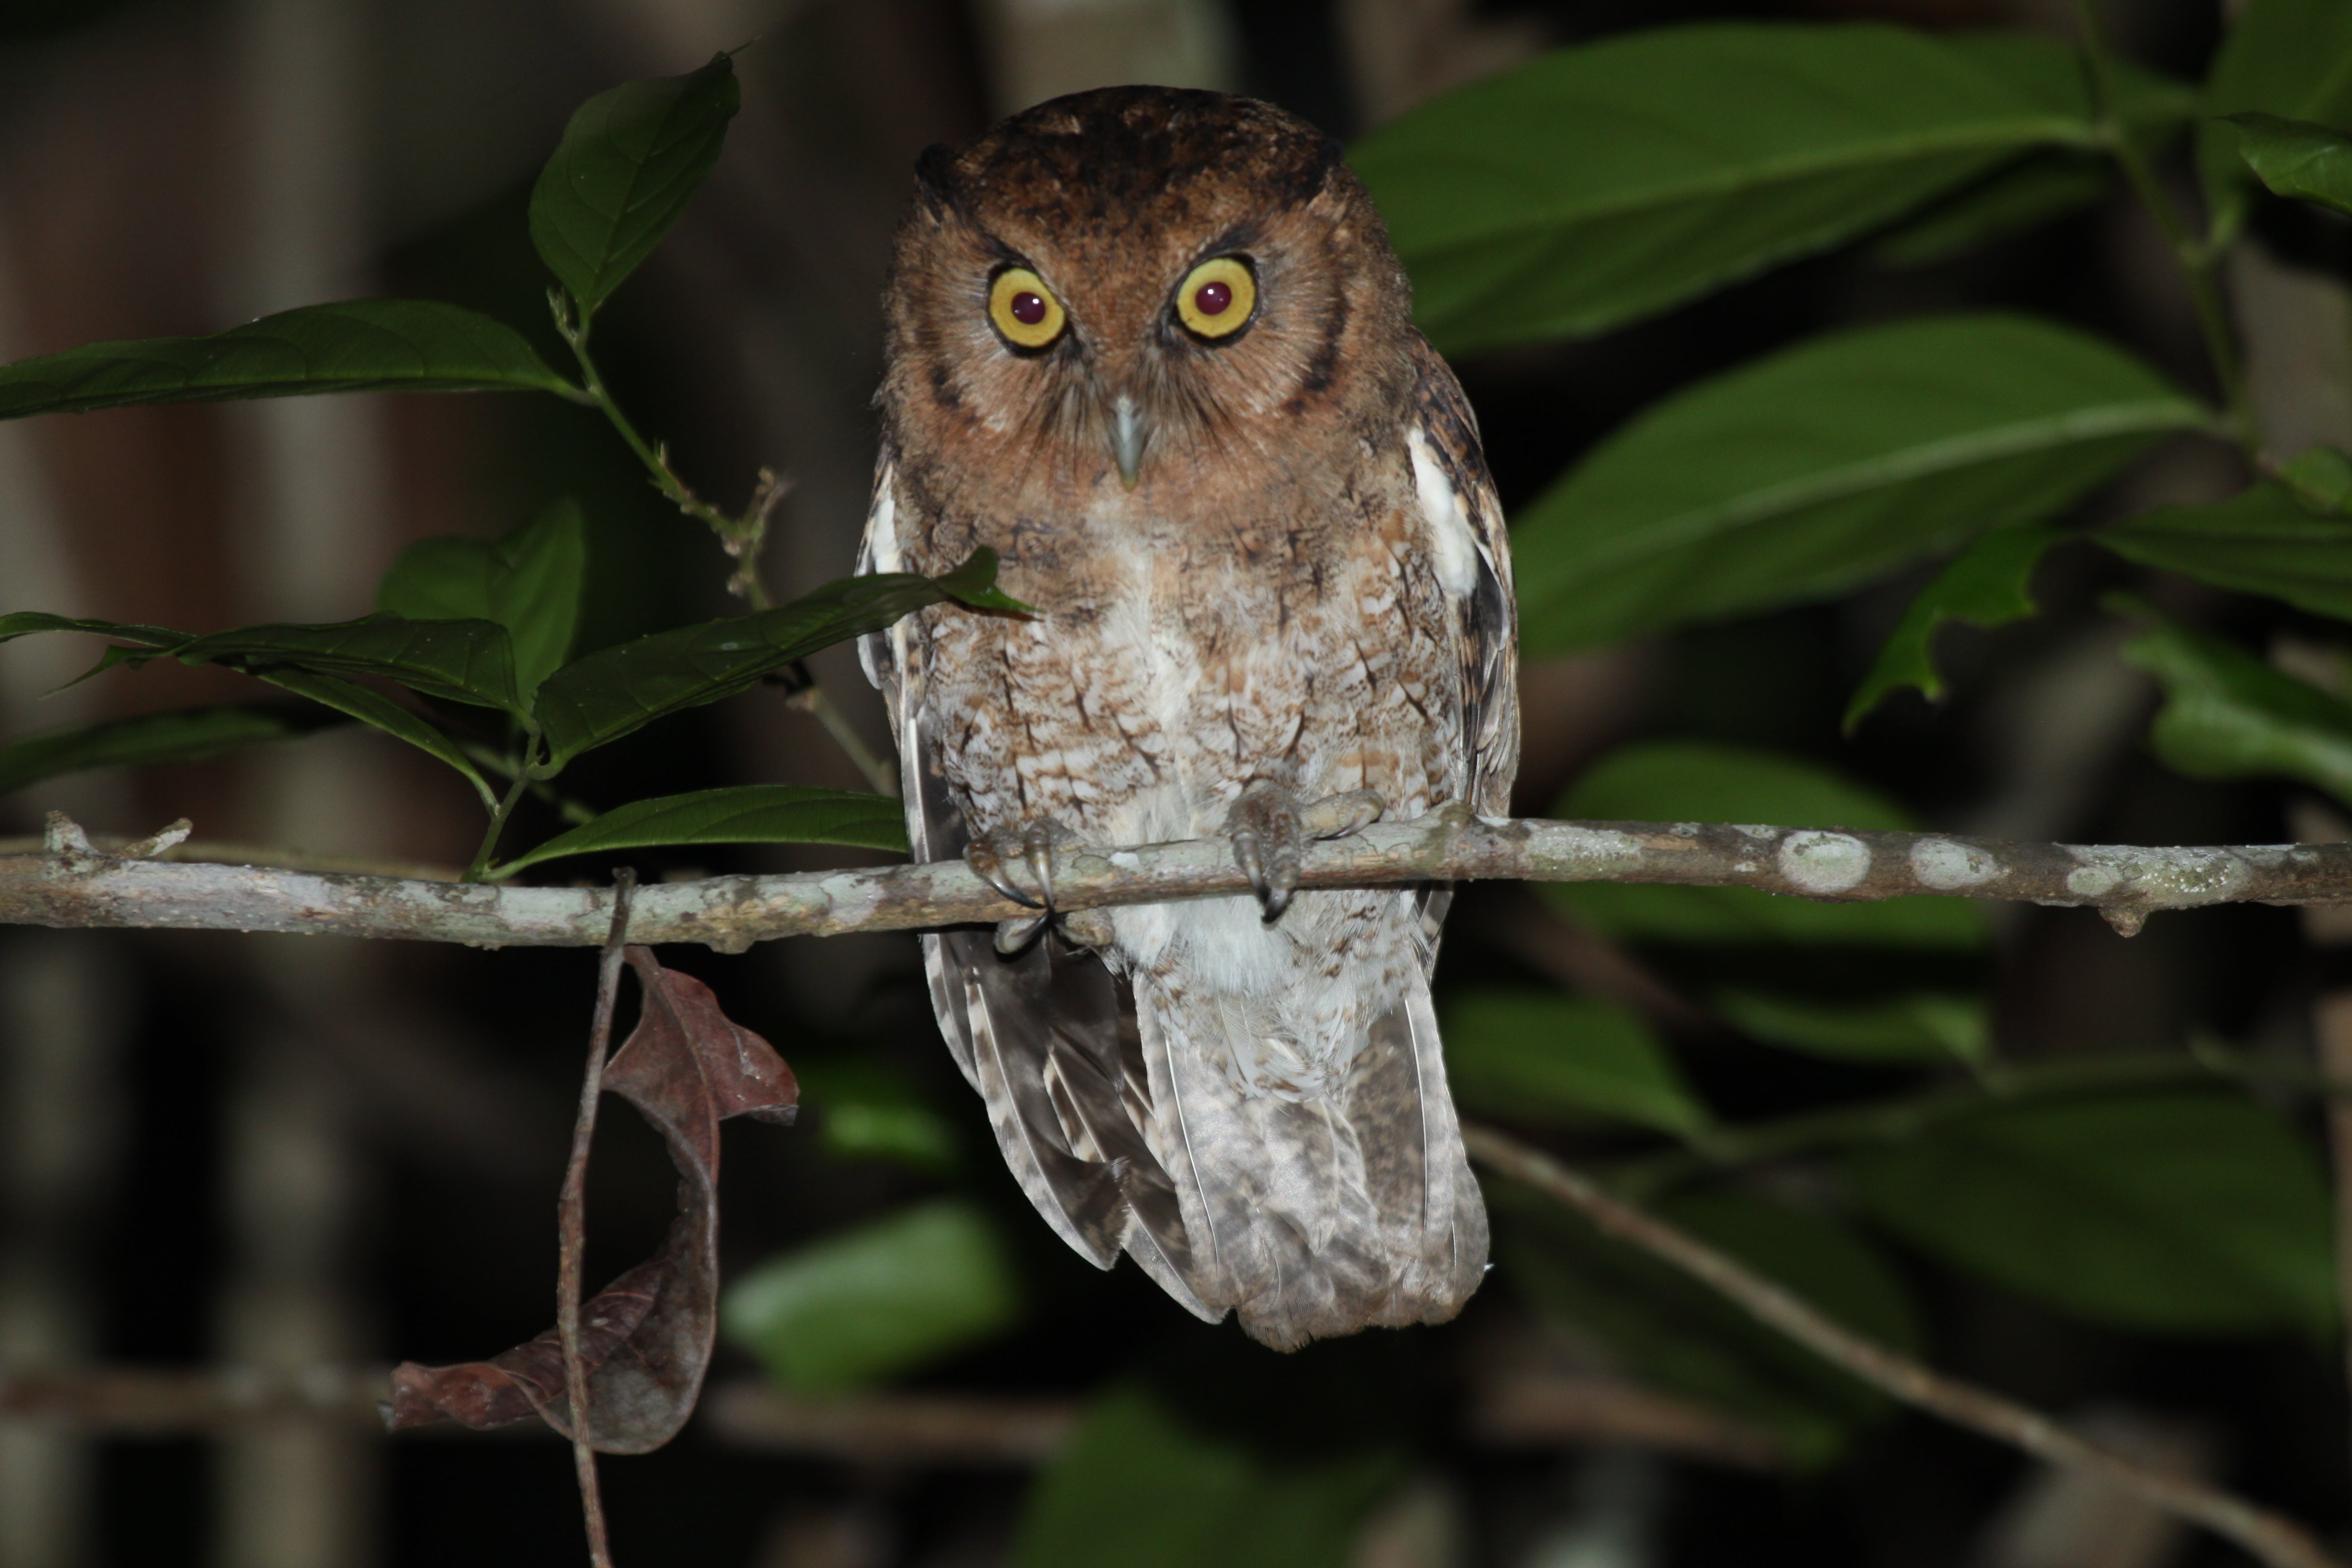 The alagoas screech owl is one of two new species discovered in the Amazon and Atlantic forests